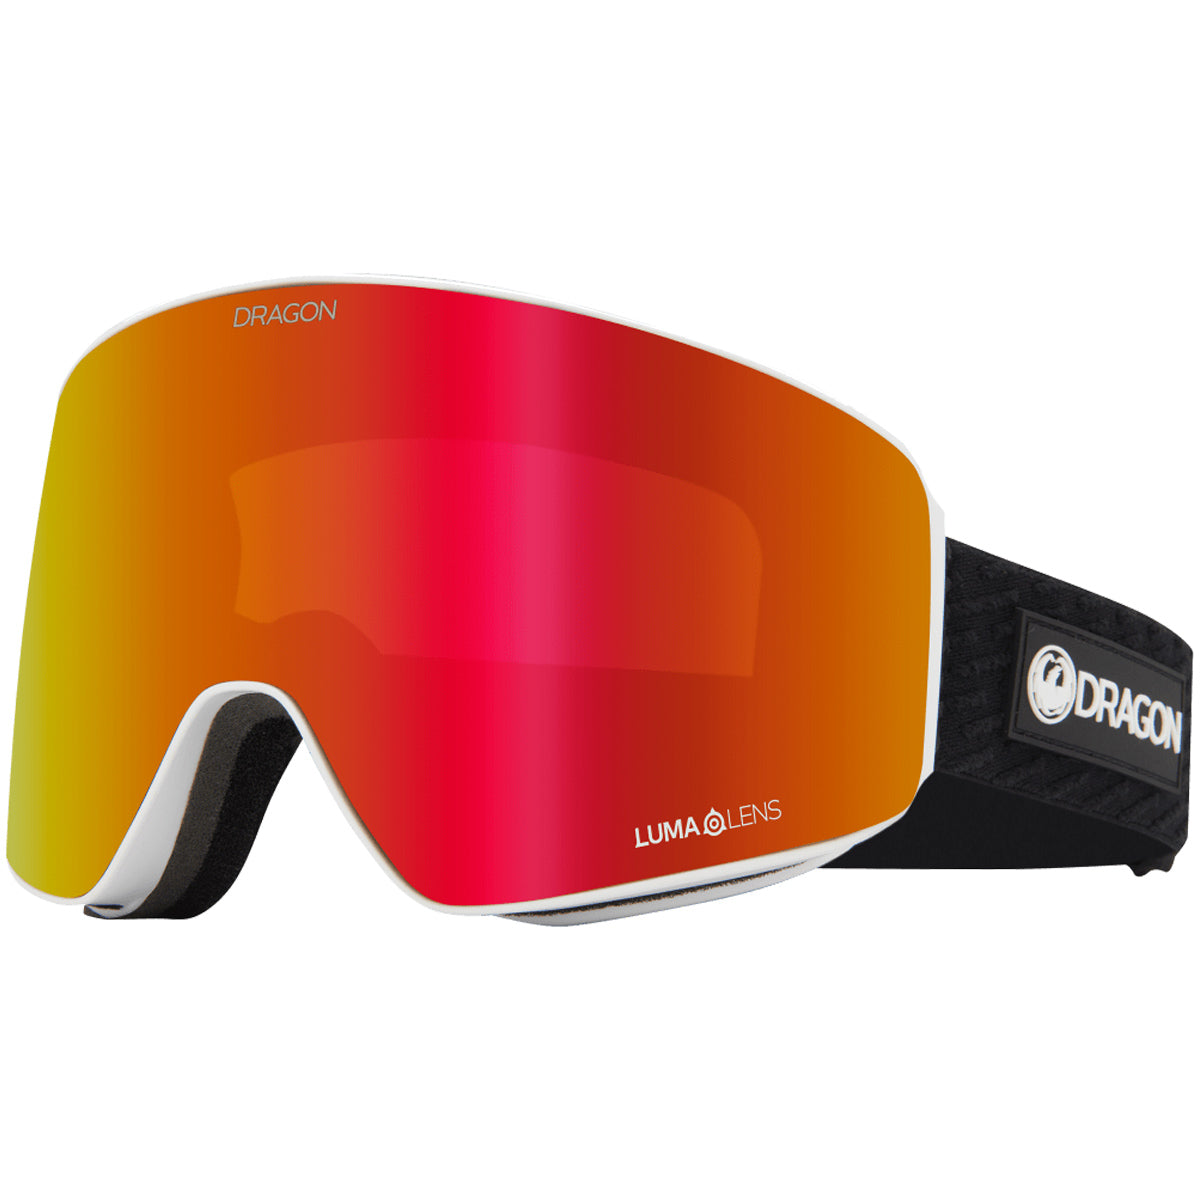 Dragon DR PXV Snowboard Goggles - Red Ion/Light Rose image 1